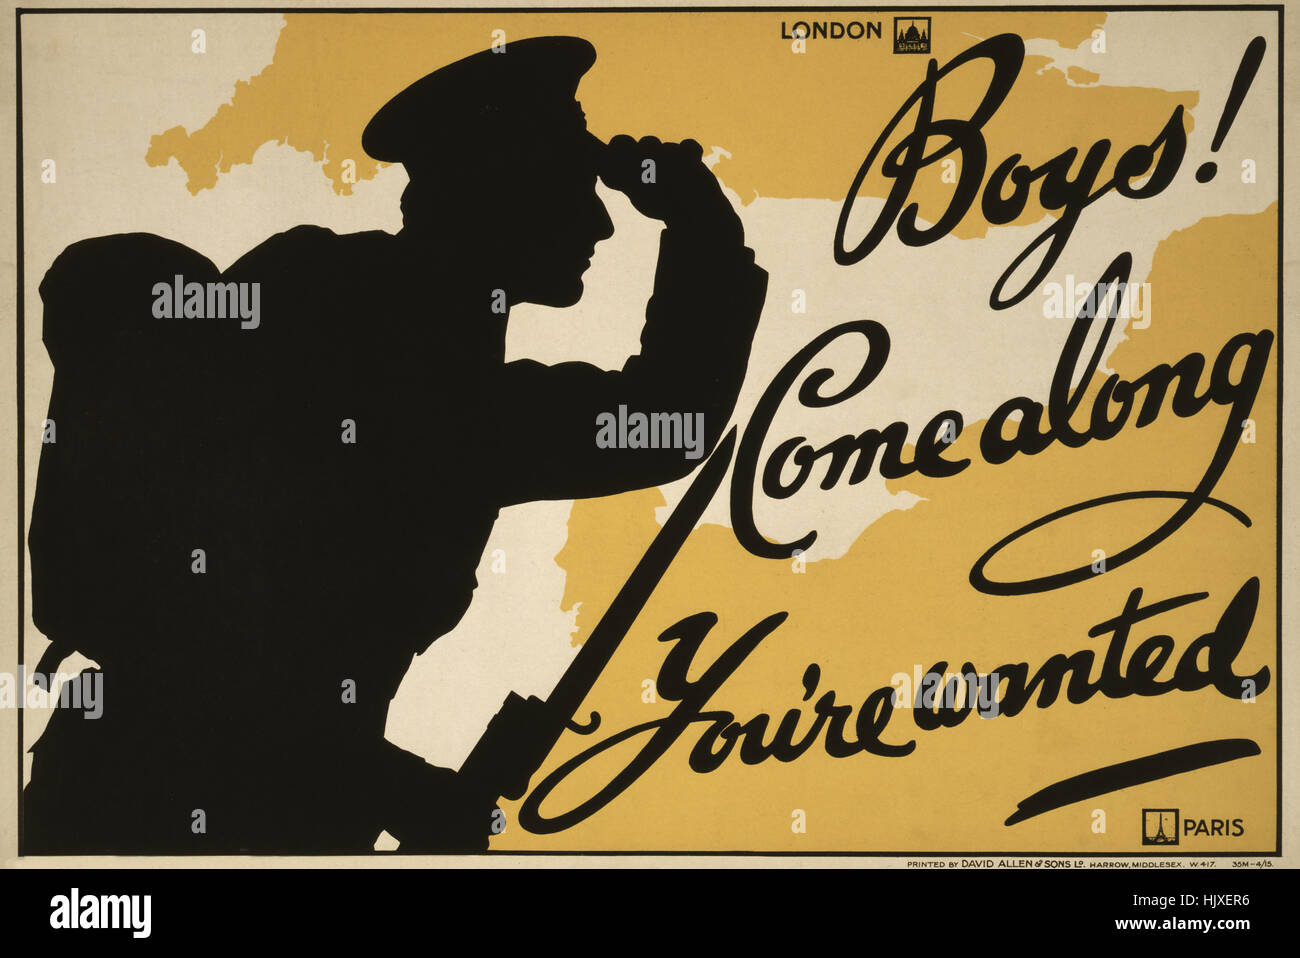 Silhouette of Soldier Looking at Map of United Kingdom and France, 'Boys! Come Along, You're Invited', World War I Recruitment Poster, Parliamentary Recruiting Committee, United Kingdom, 1915 Stock Photo